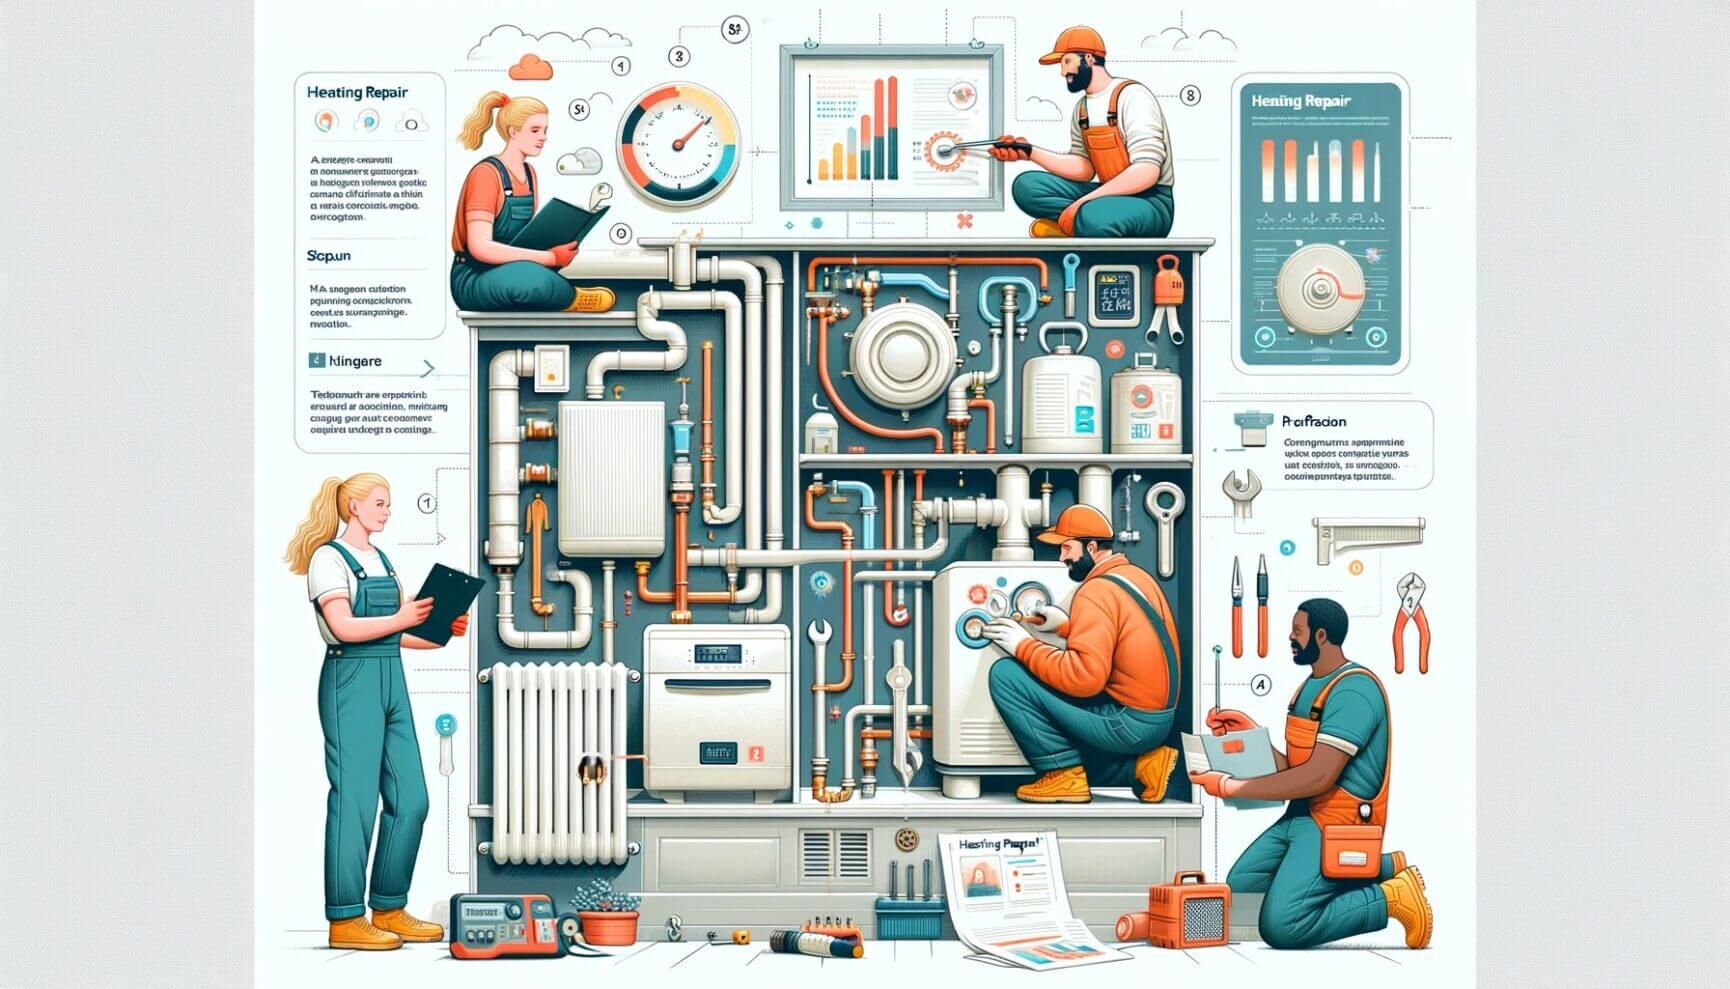 A set of illustrations showing people working on a plumbing system.